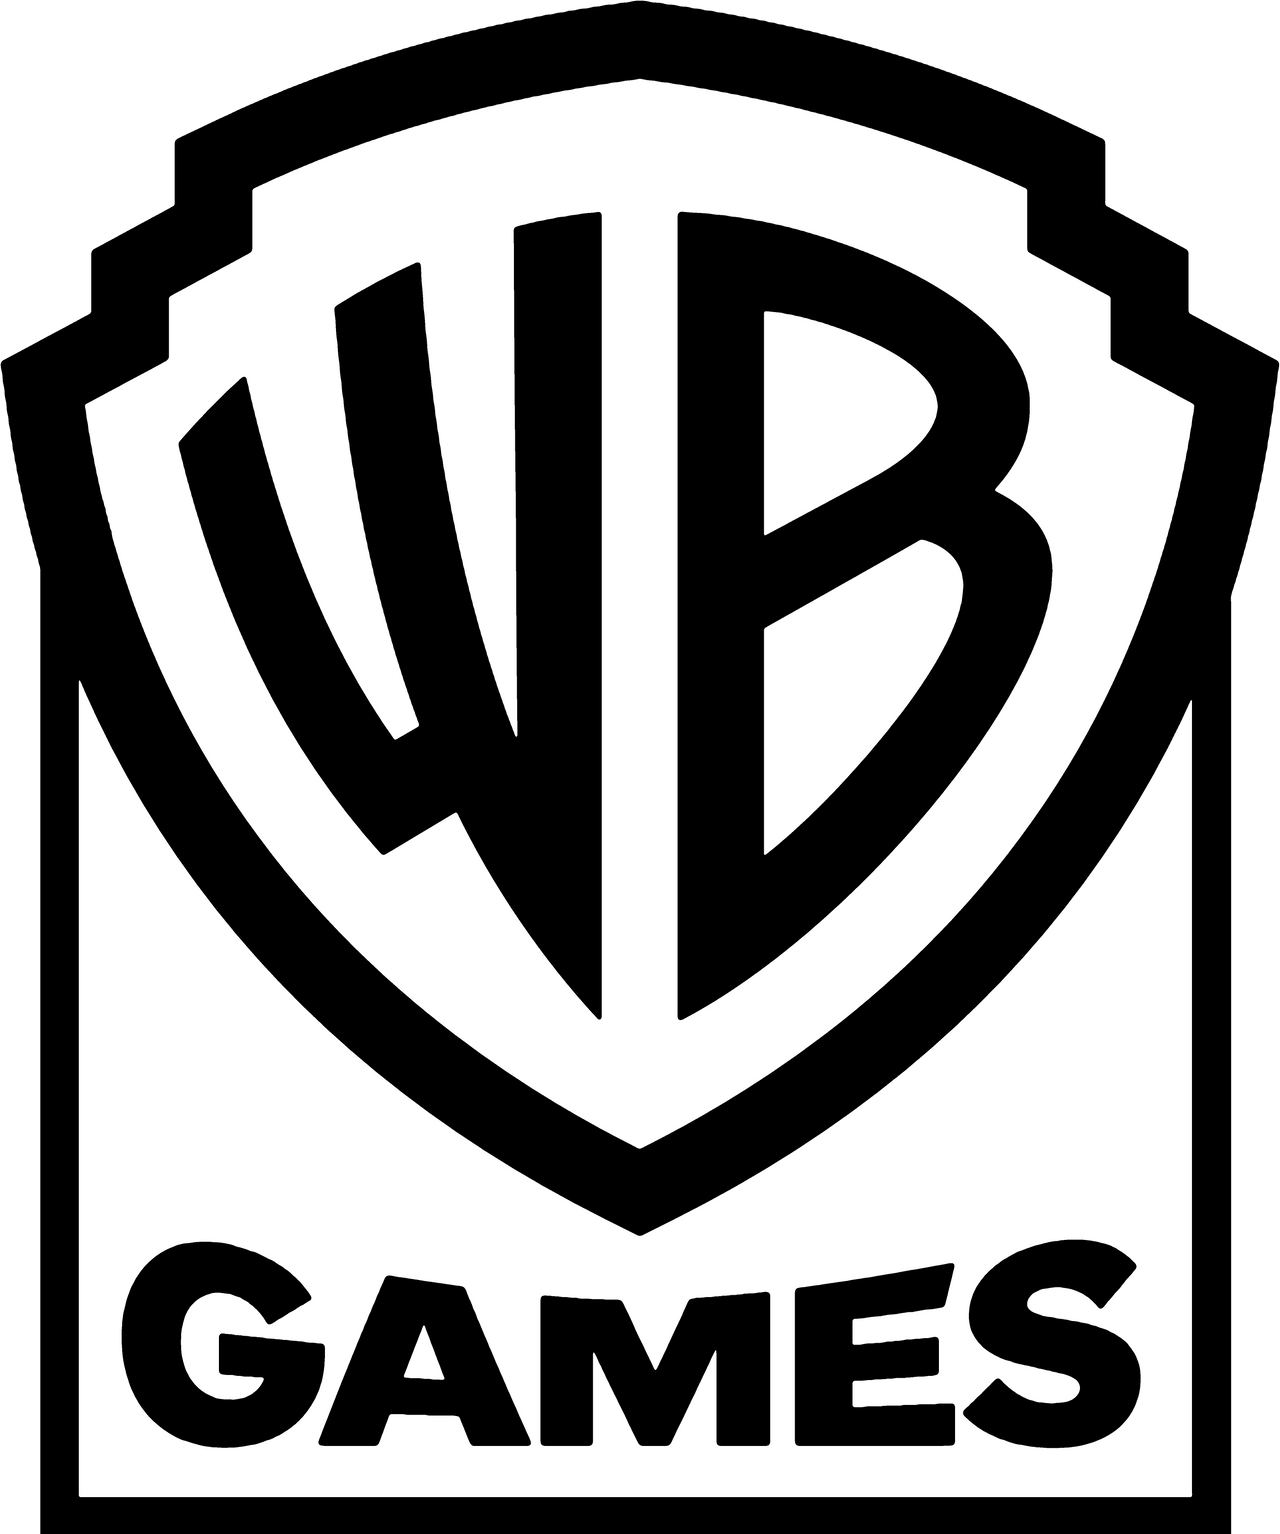 What If?: Warner Bros. Games logo concept 2023 by WBBlackOfficial